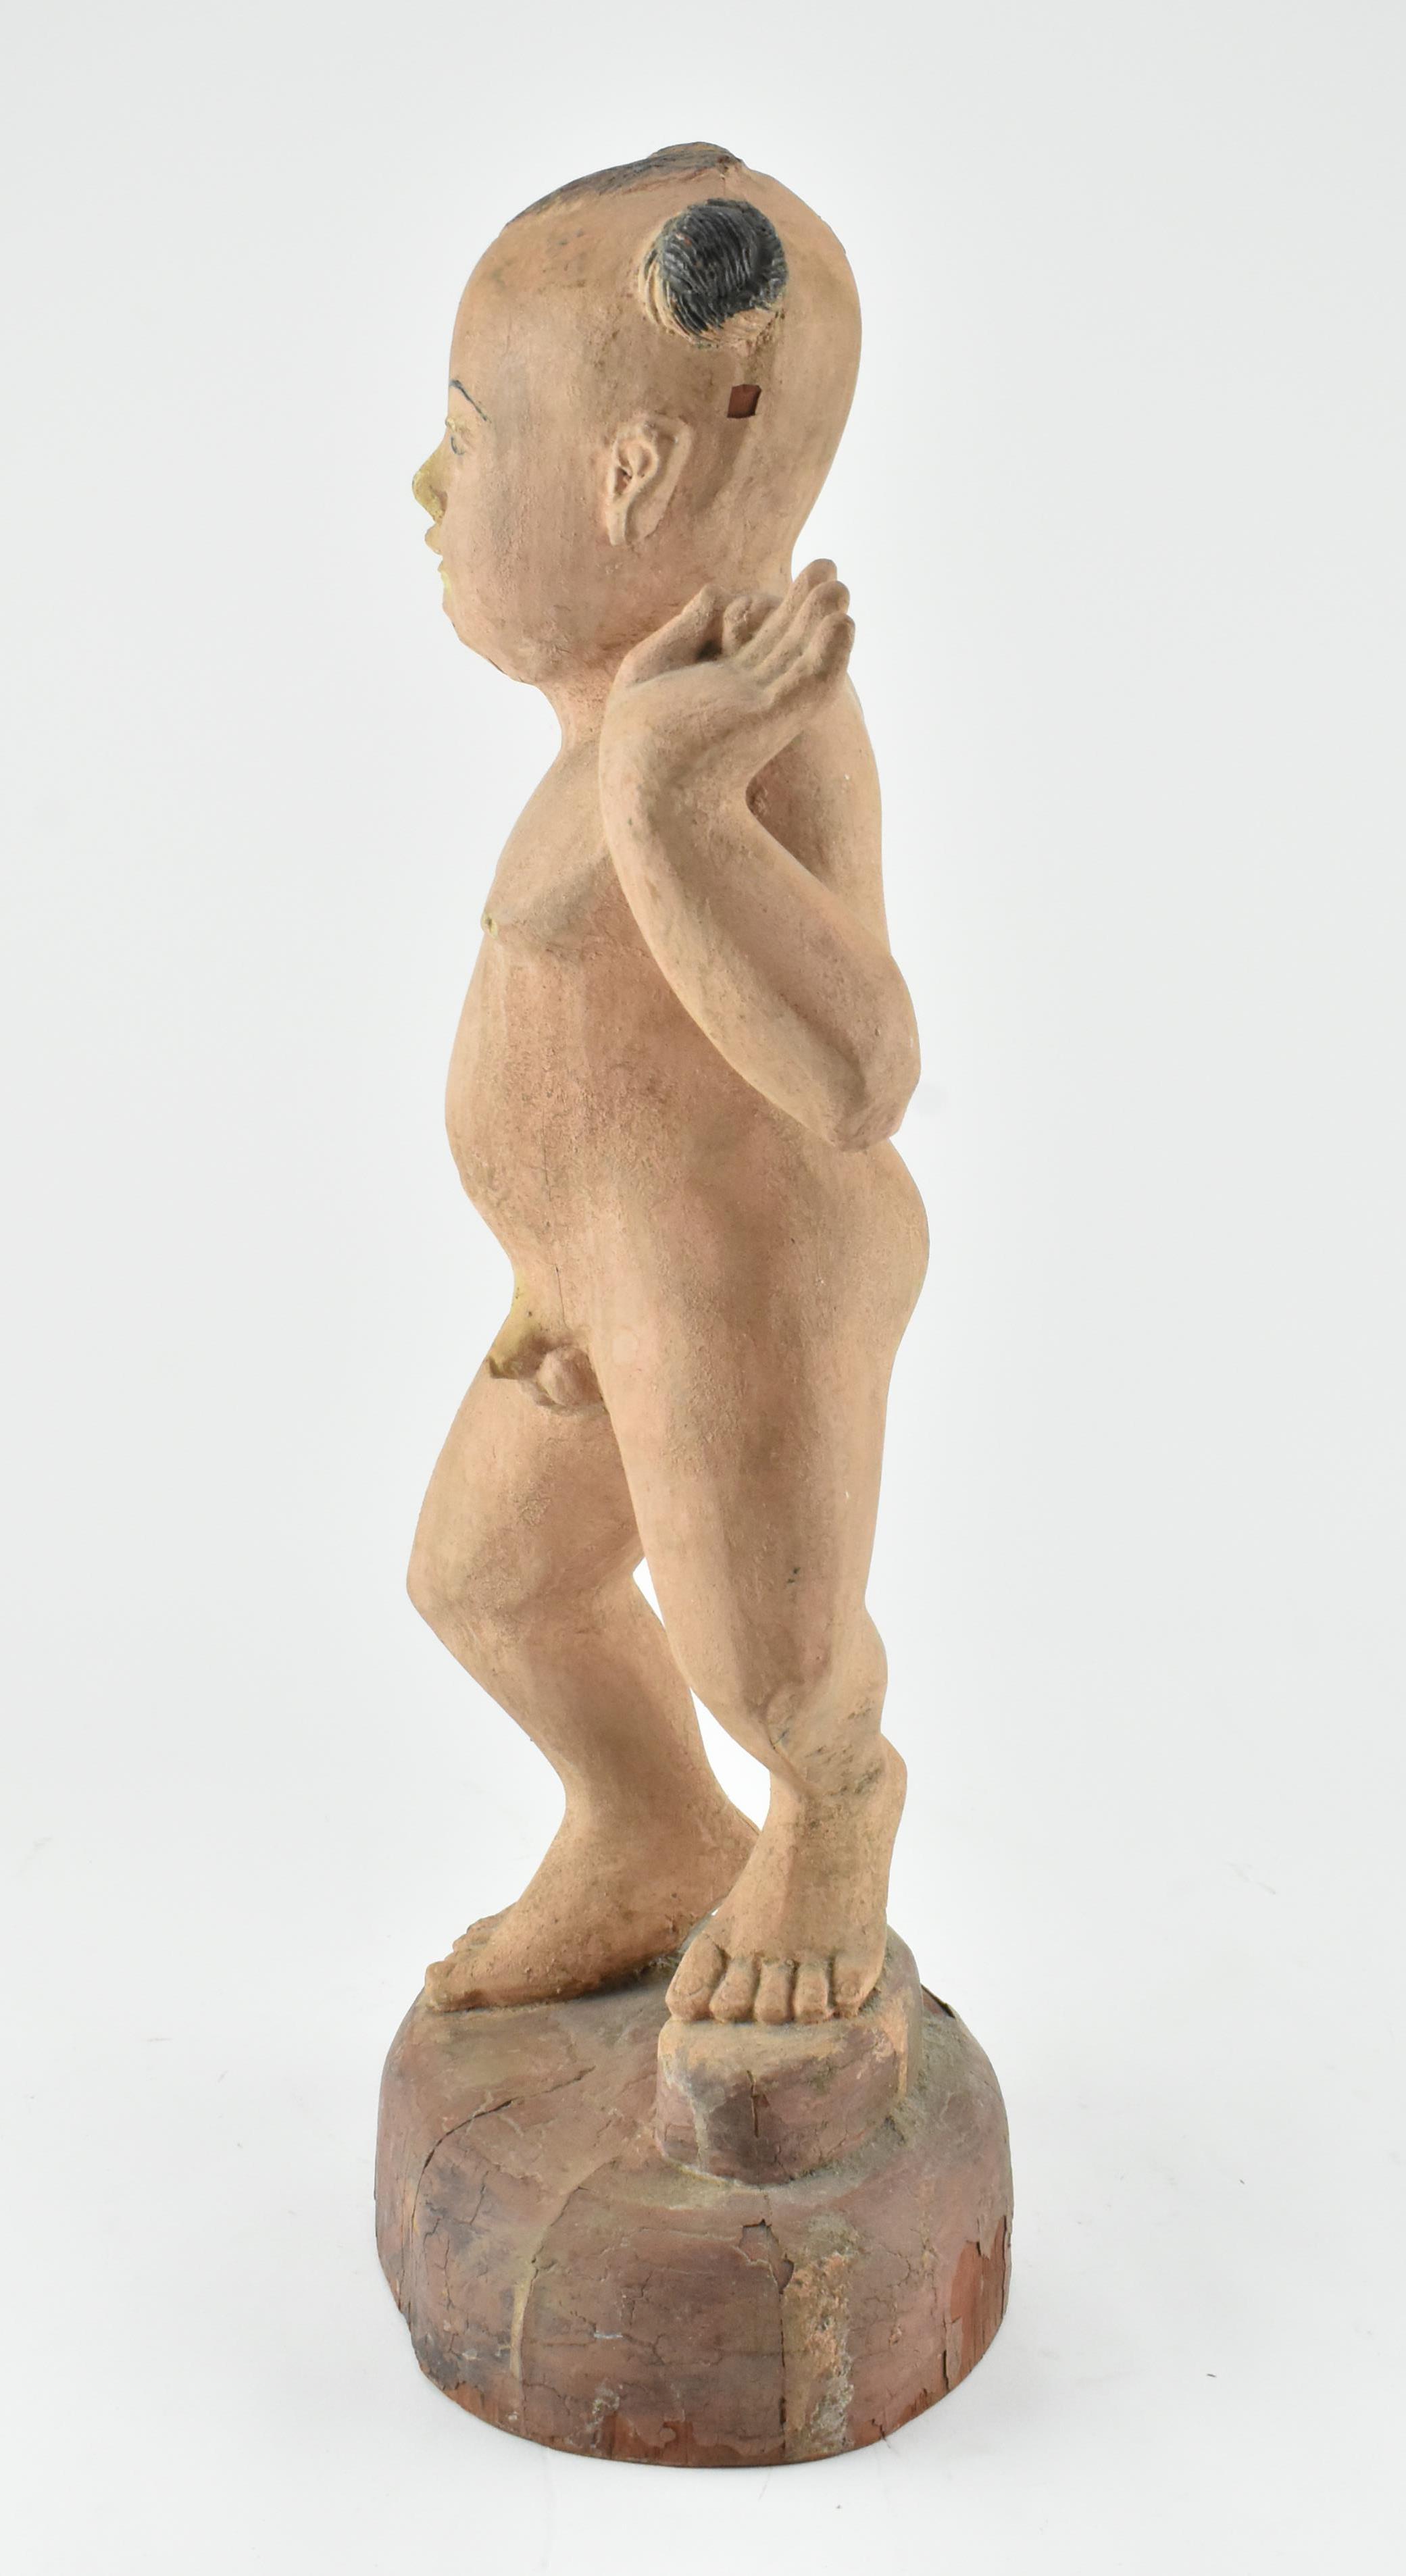 CHINESE CARVED WOODEN STATUE OF A CHILD 清 木刻童子 - Image 4 of 5